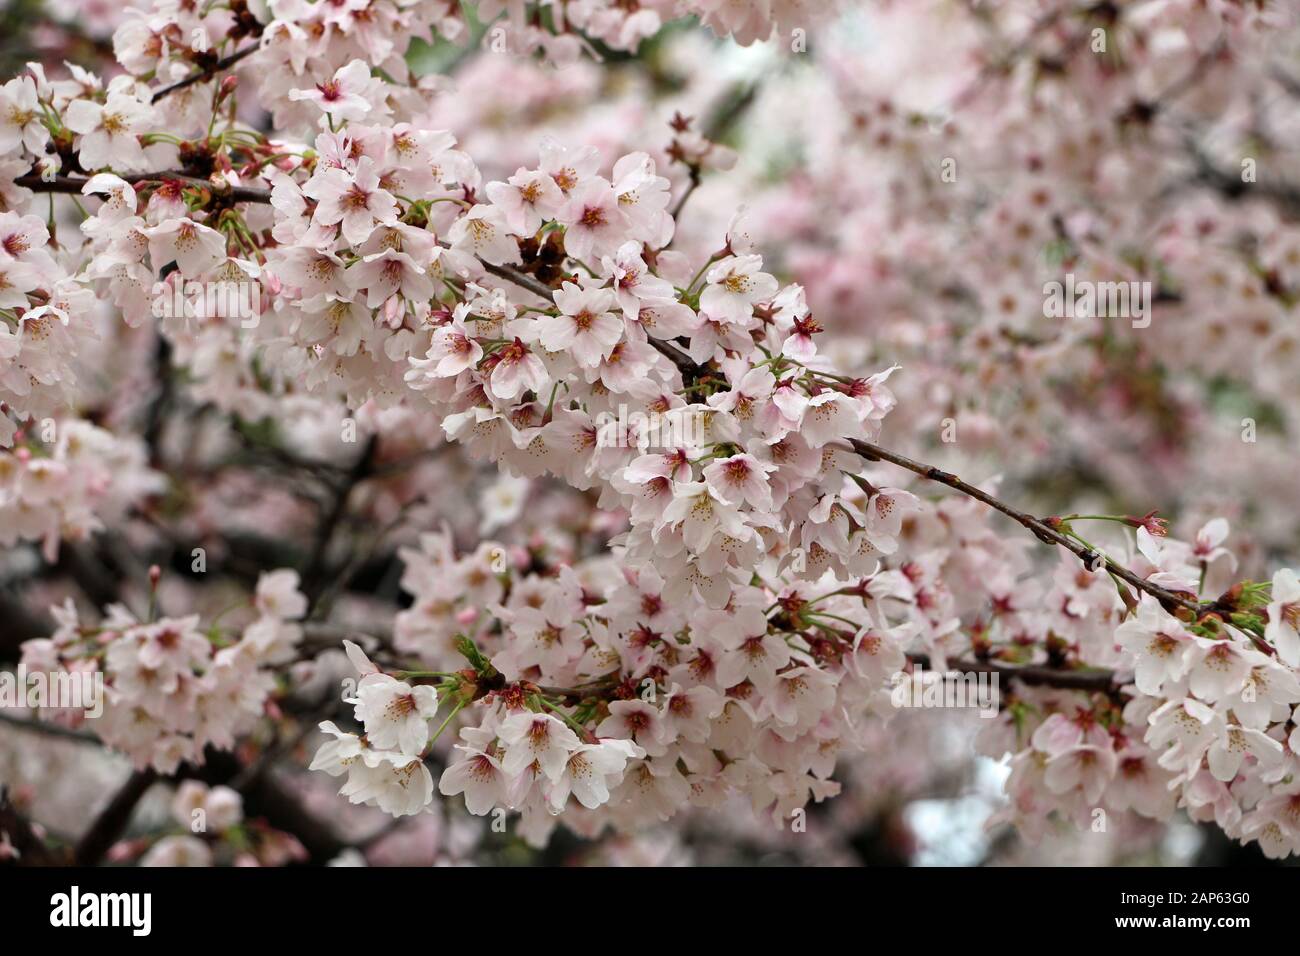 Cherry blossoms in Kyoto Japan Stock Photo